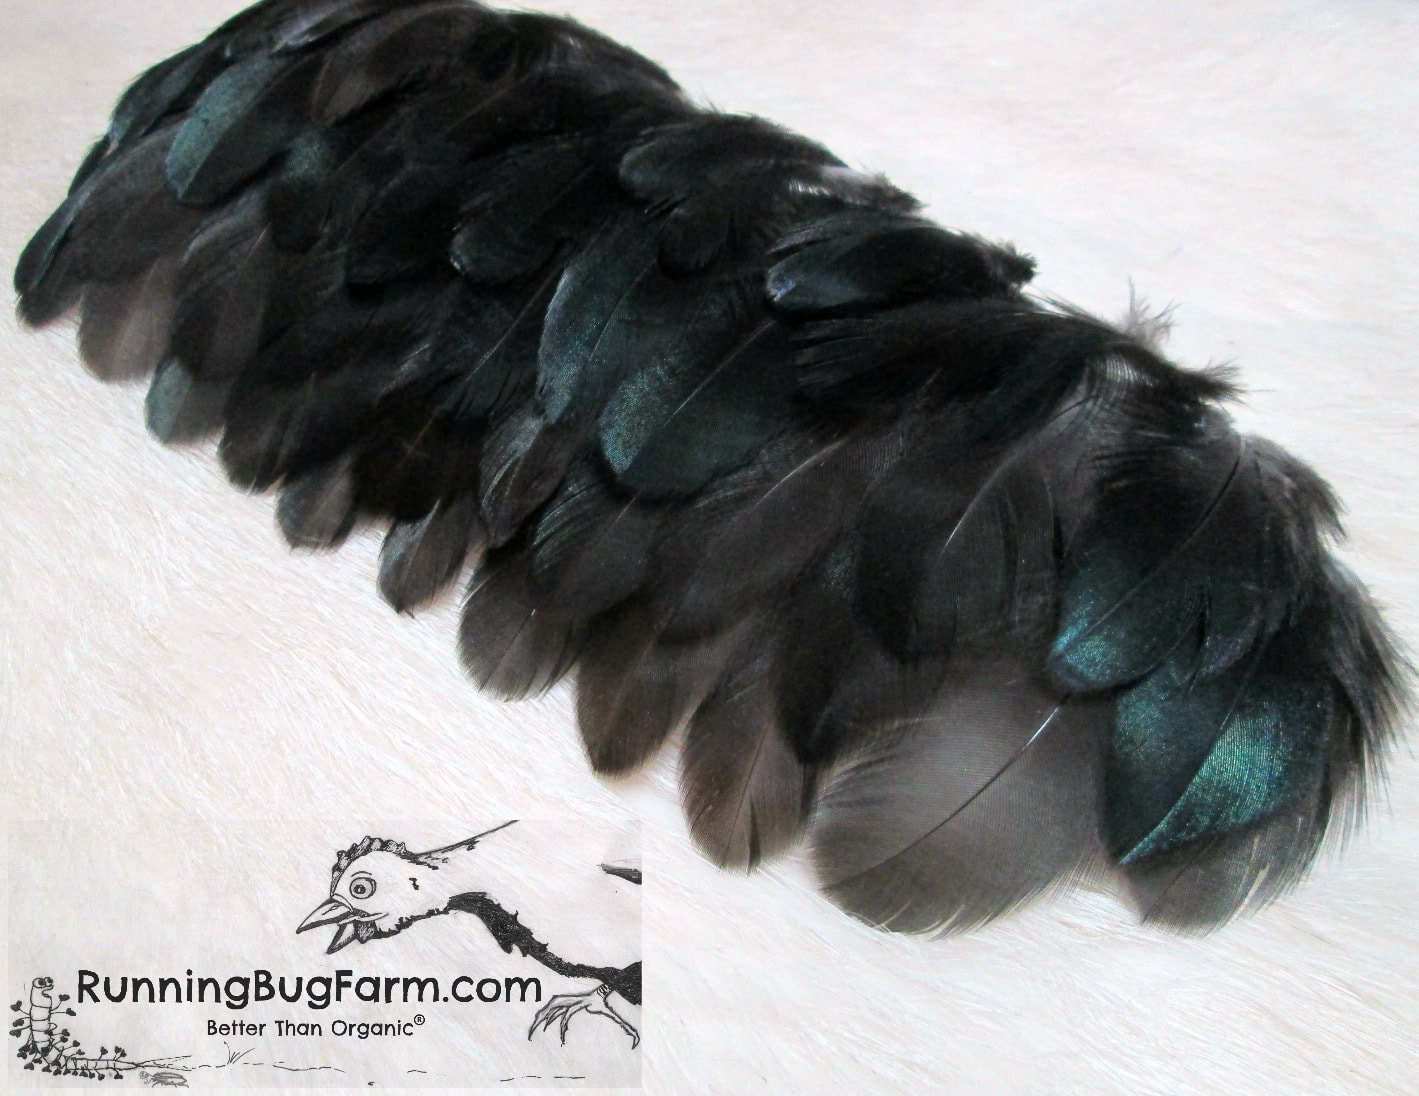 50/100Pcs Natural Black Rooster Feathers 13-18Cm Colorful Chicken Pheasant  Plumes For Crafts Jewelry Making Party Decoration orange 100PCS